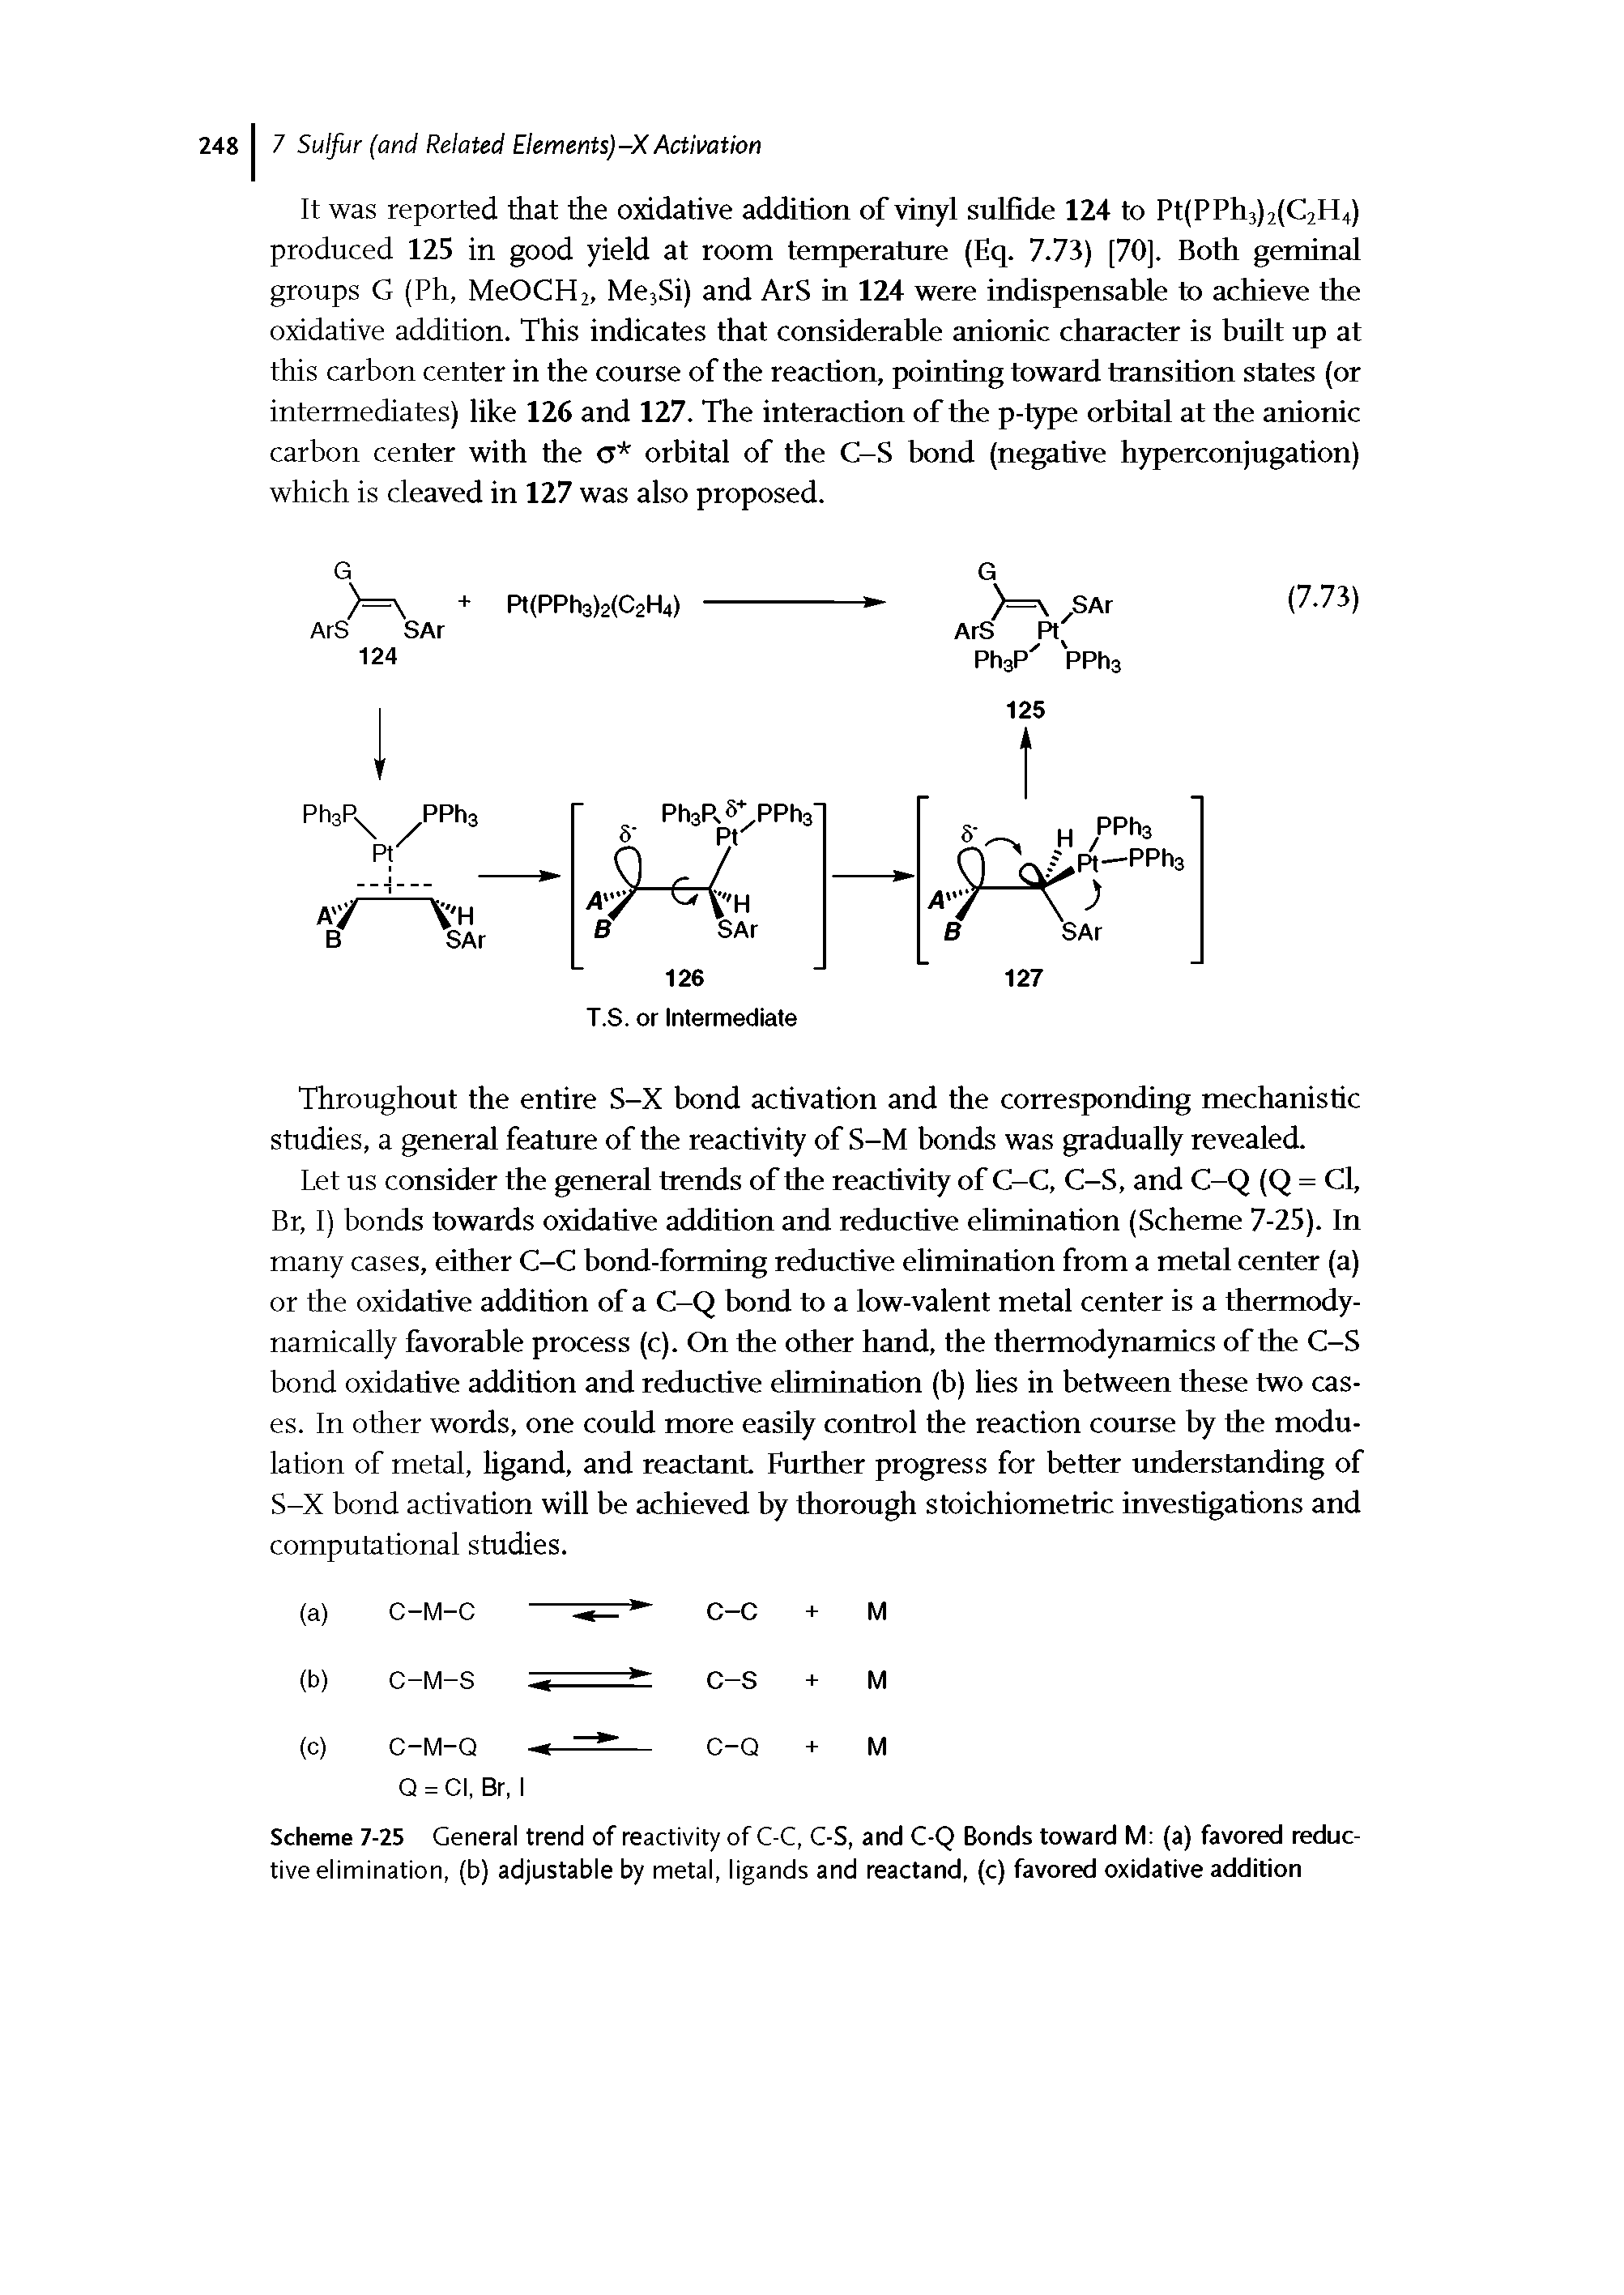 Scheme 7-25 General trend of reactivity of C-C, C-S, and C-Q Bonds toward M (a) favored reductive elimination, (b) adjustable by metal, ligands and reactand, (c) favored oxidative addition...